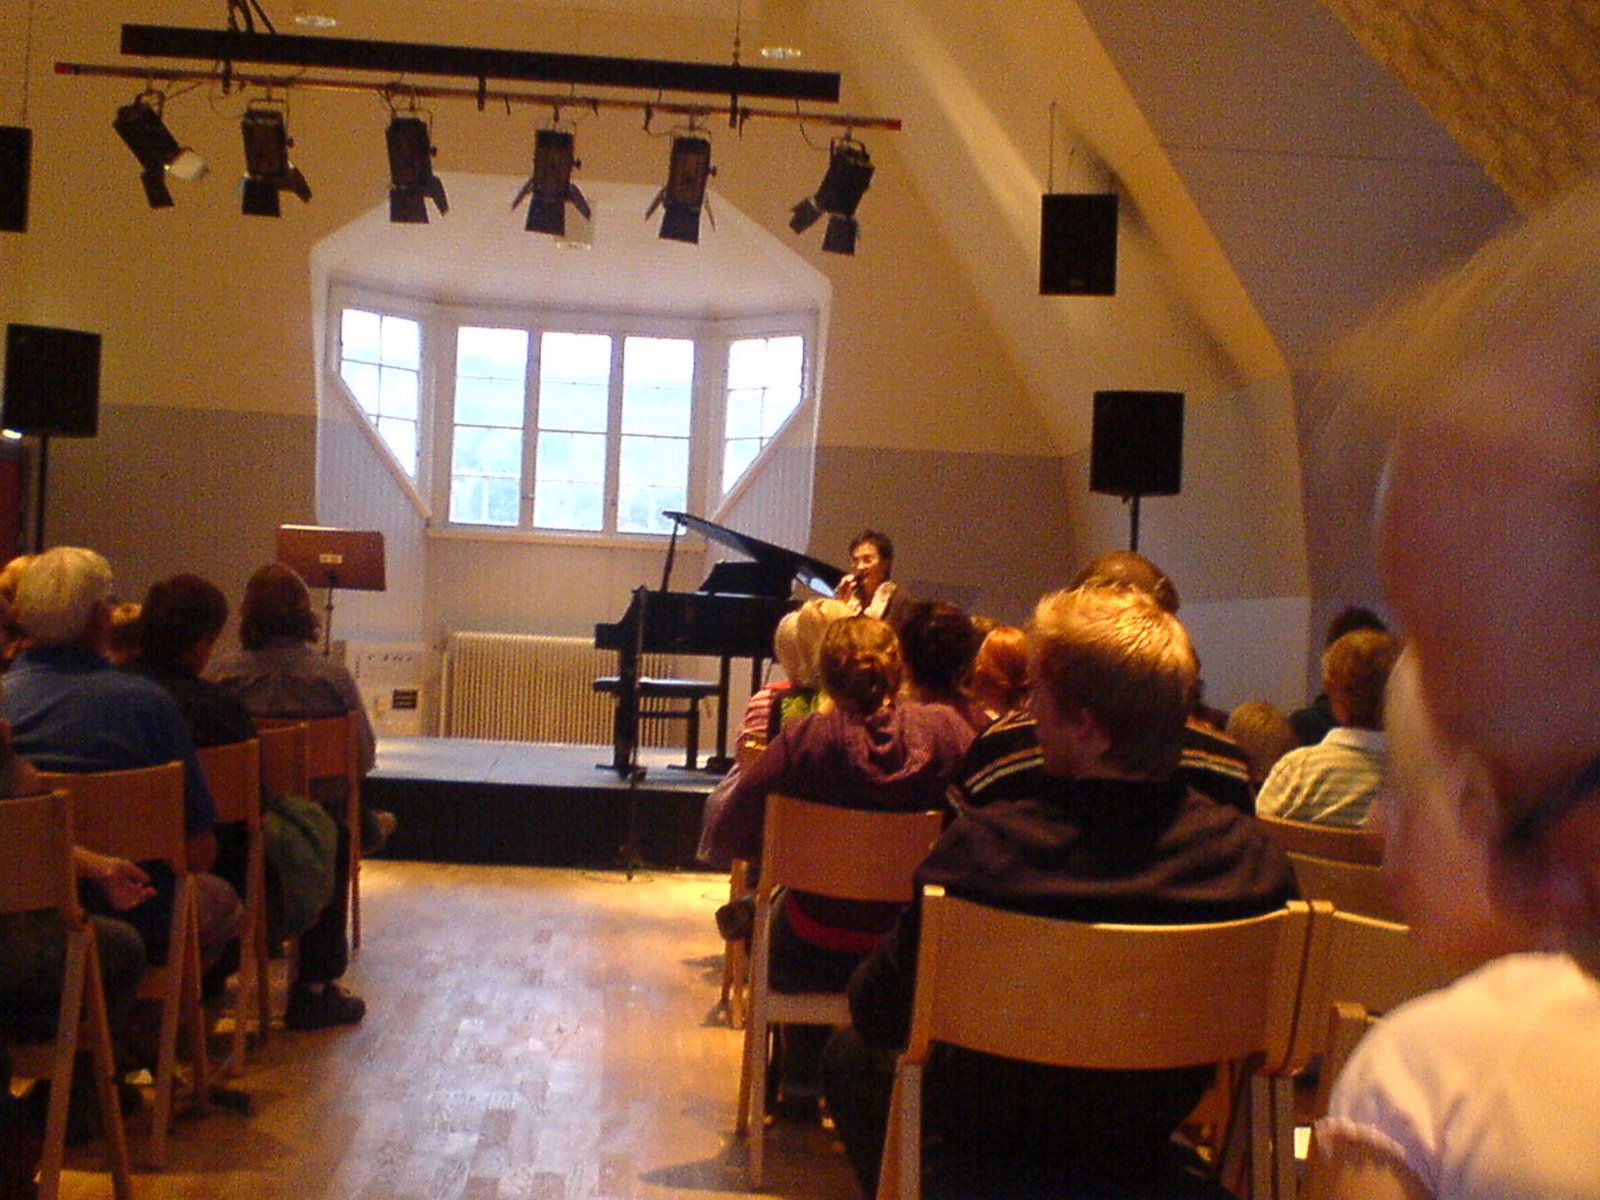 From a music competition, September 2006